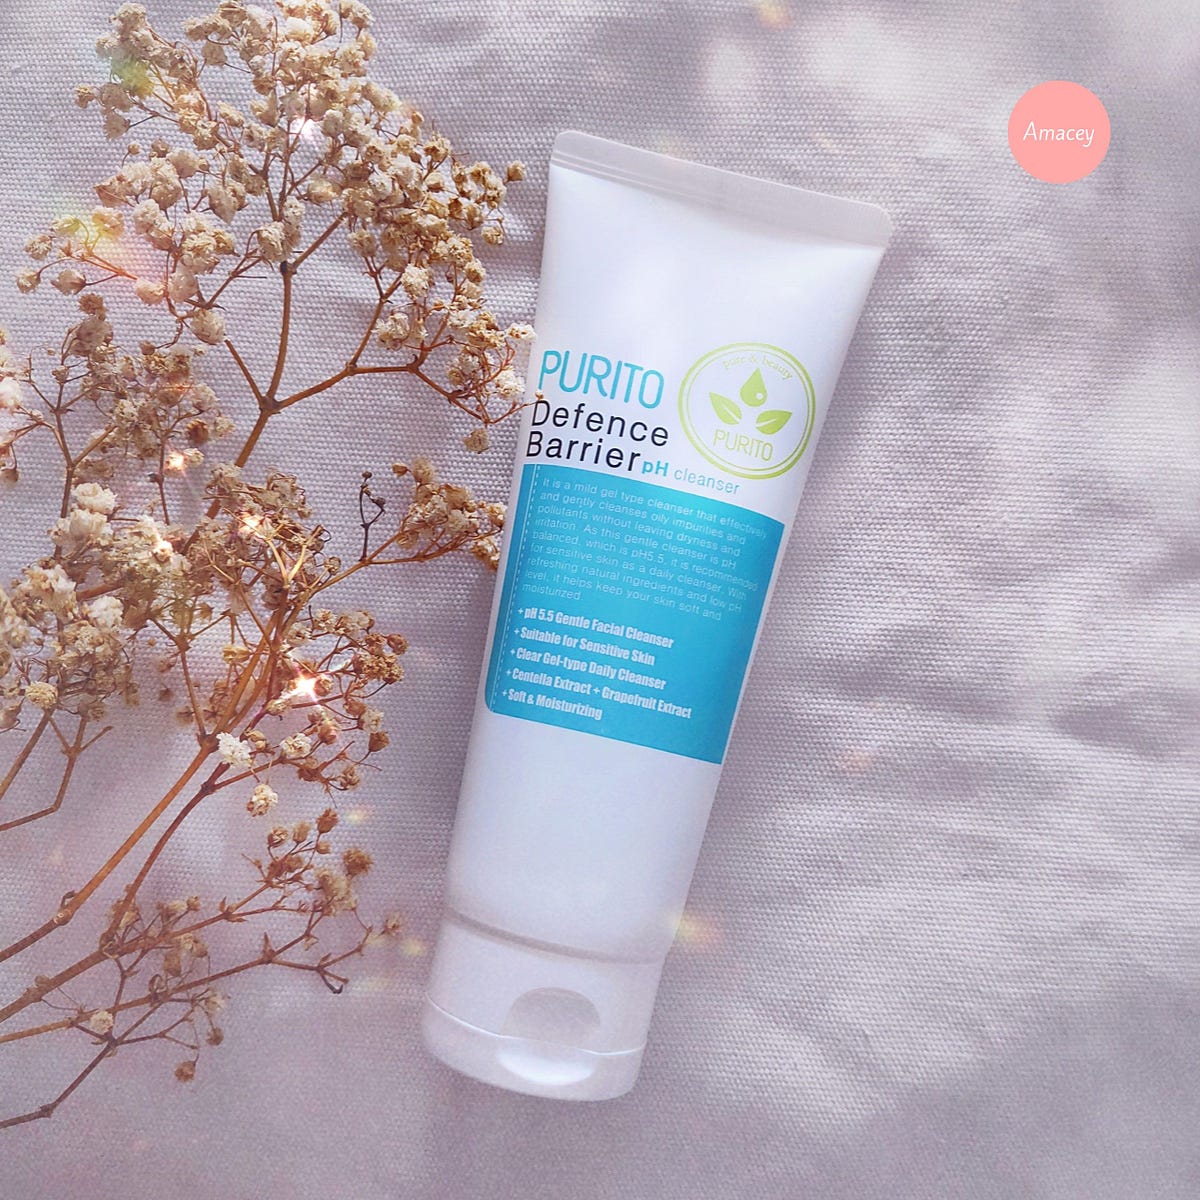 Sữa rửa mặt PURITO Defence Barrier Ph Cleanser [Review]